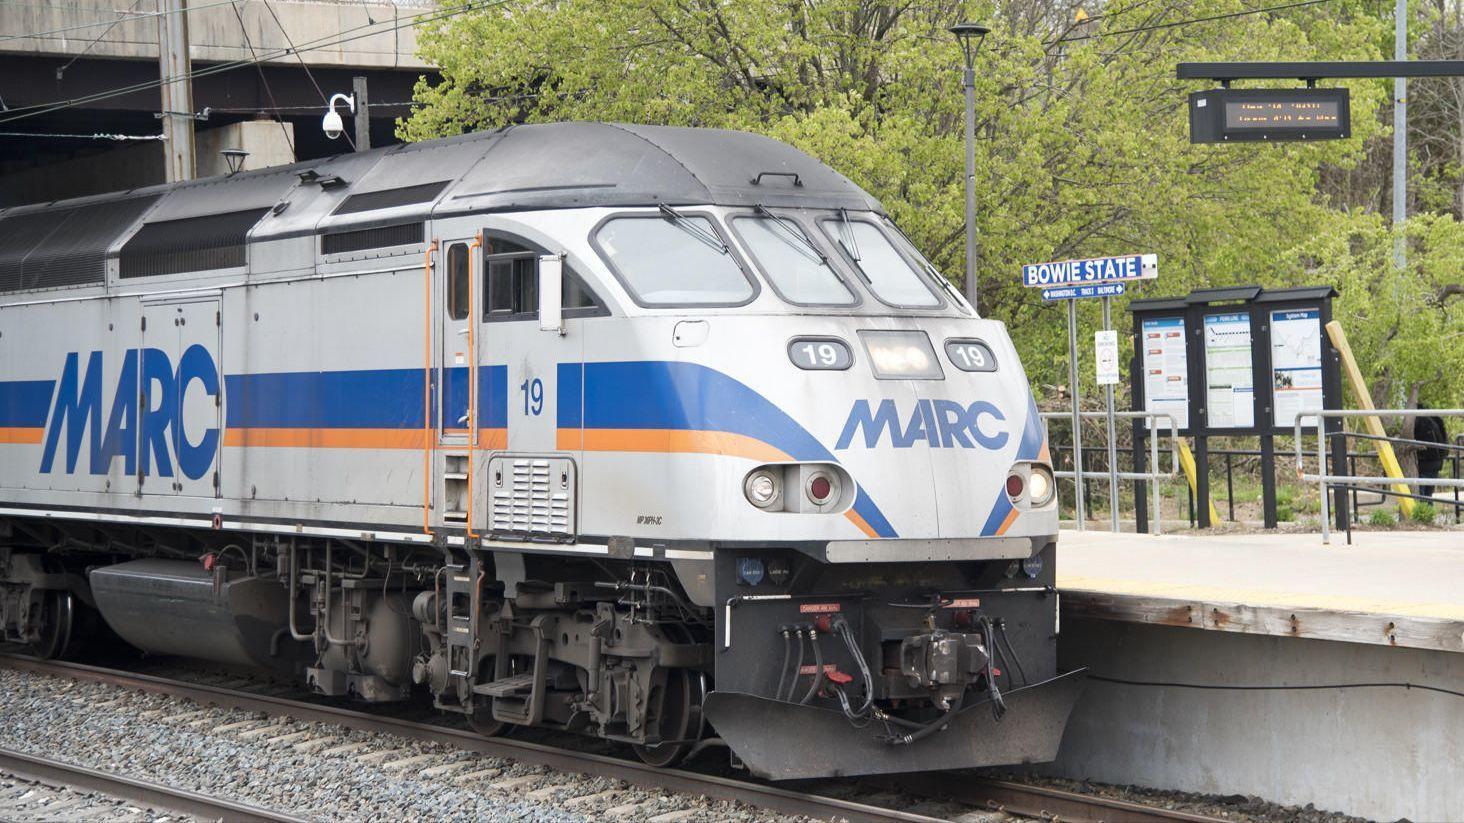 Marc Train Penn Line Schedule 2022 I've Lost A Day Of My Life To Marc Delays': Bad Weather, Track Work Causing  Problems For Commuters - Baltimore Sun